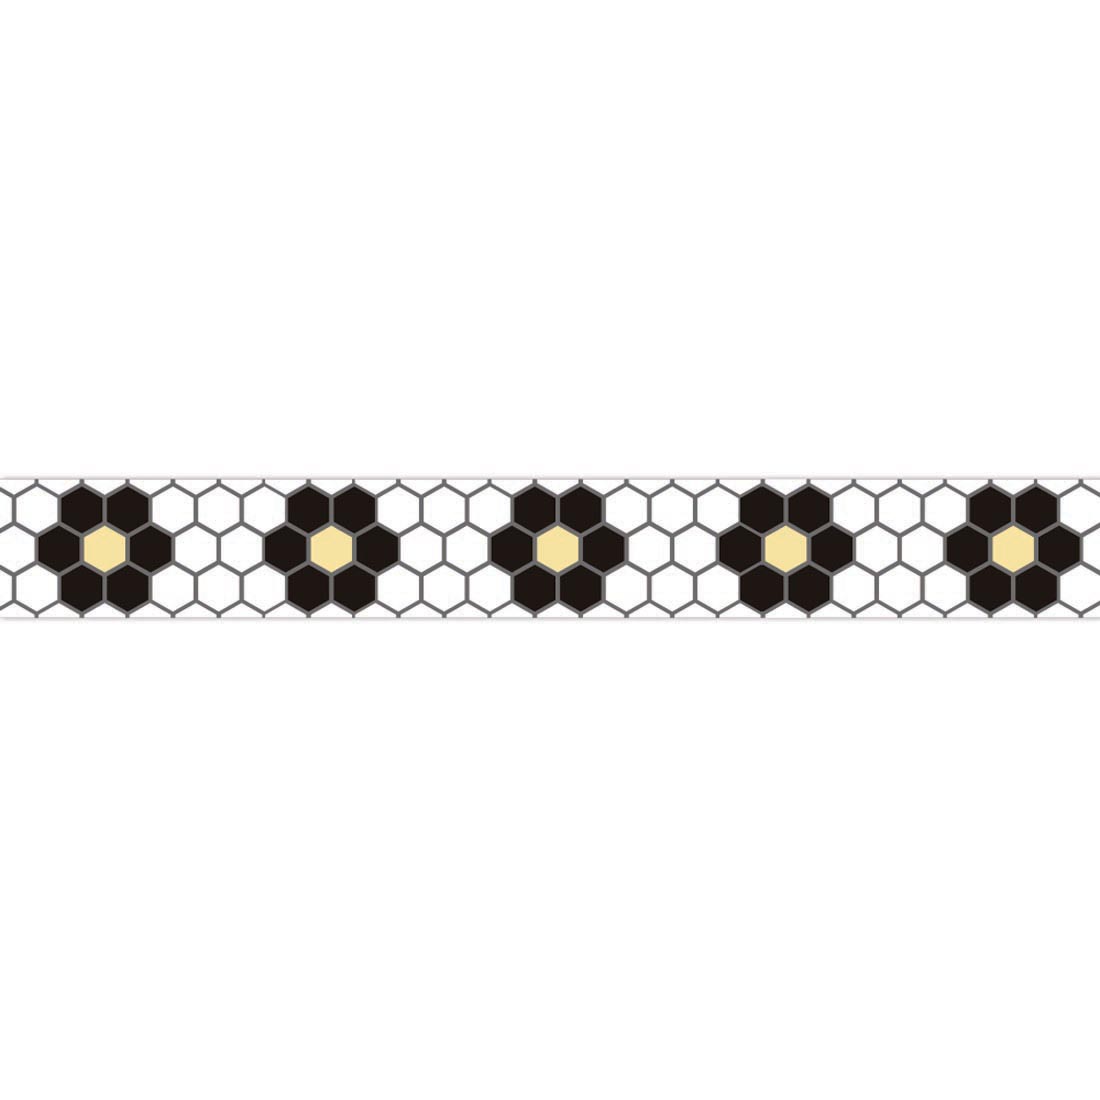 Floral Mosaic Deco Trim from The Hive collection by Eureka